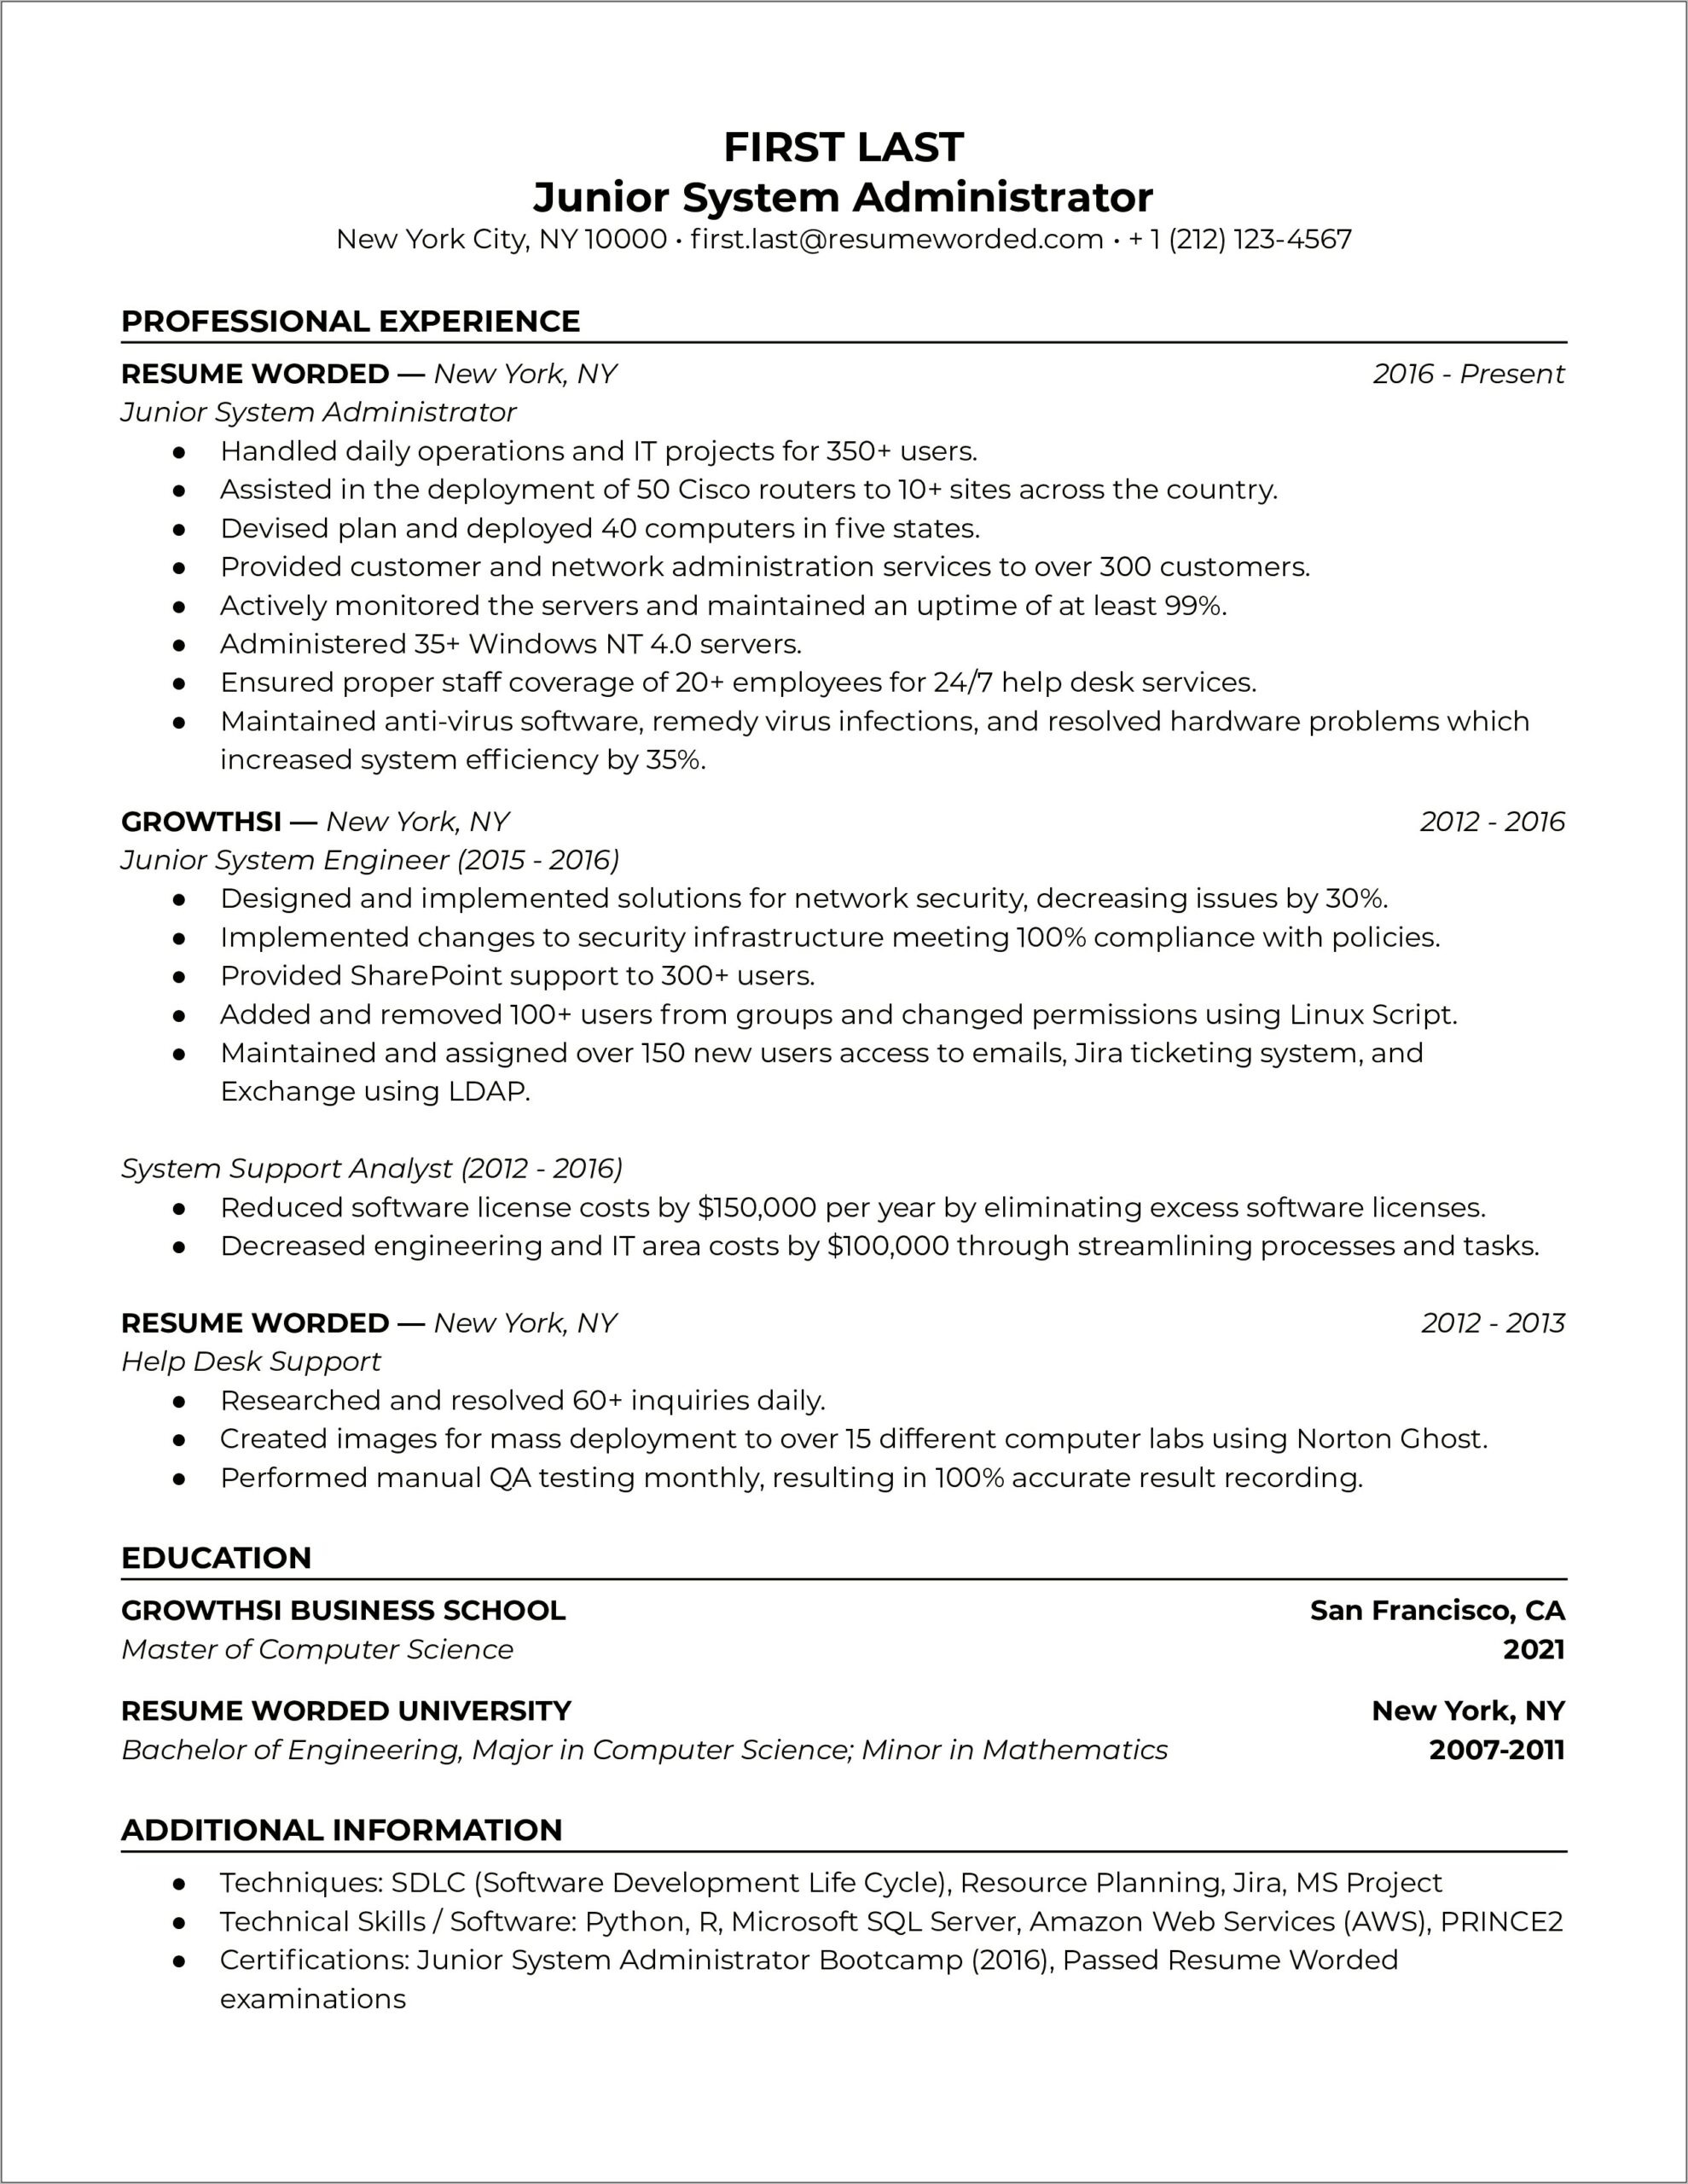 Sample Resume For School Principal Position In India